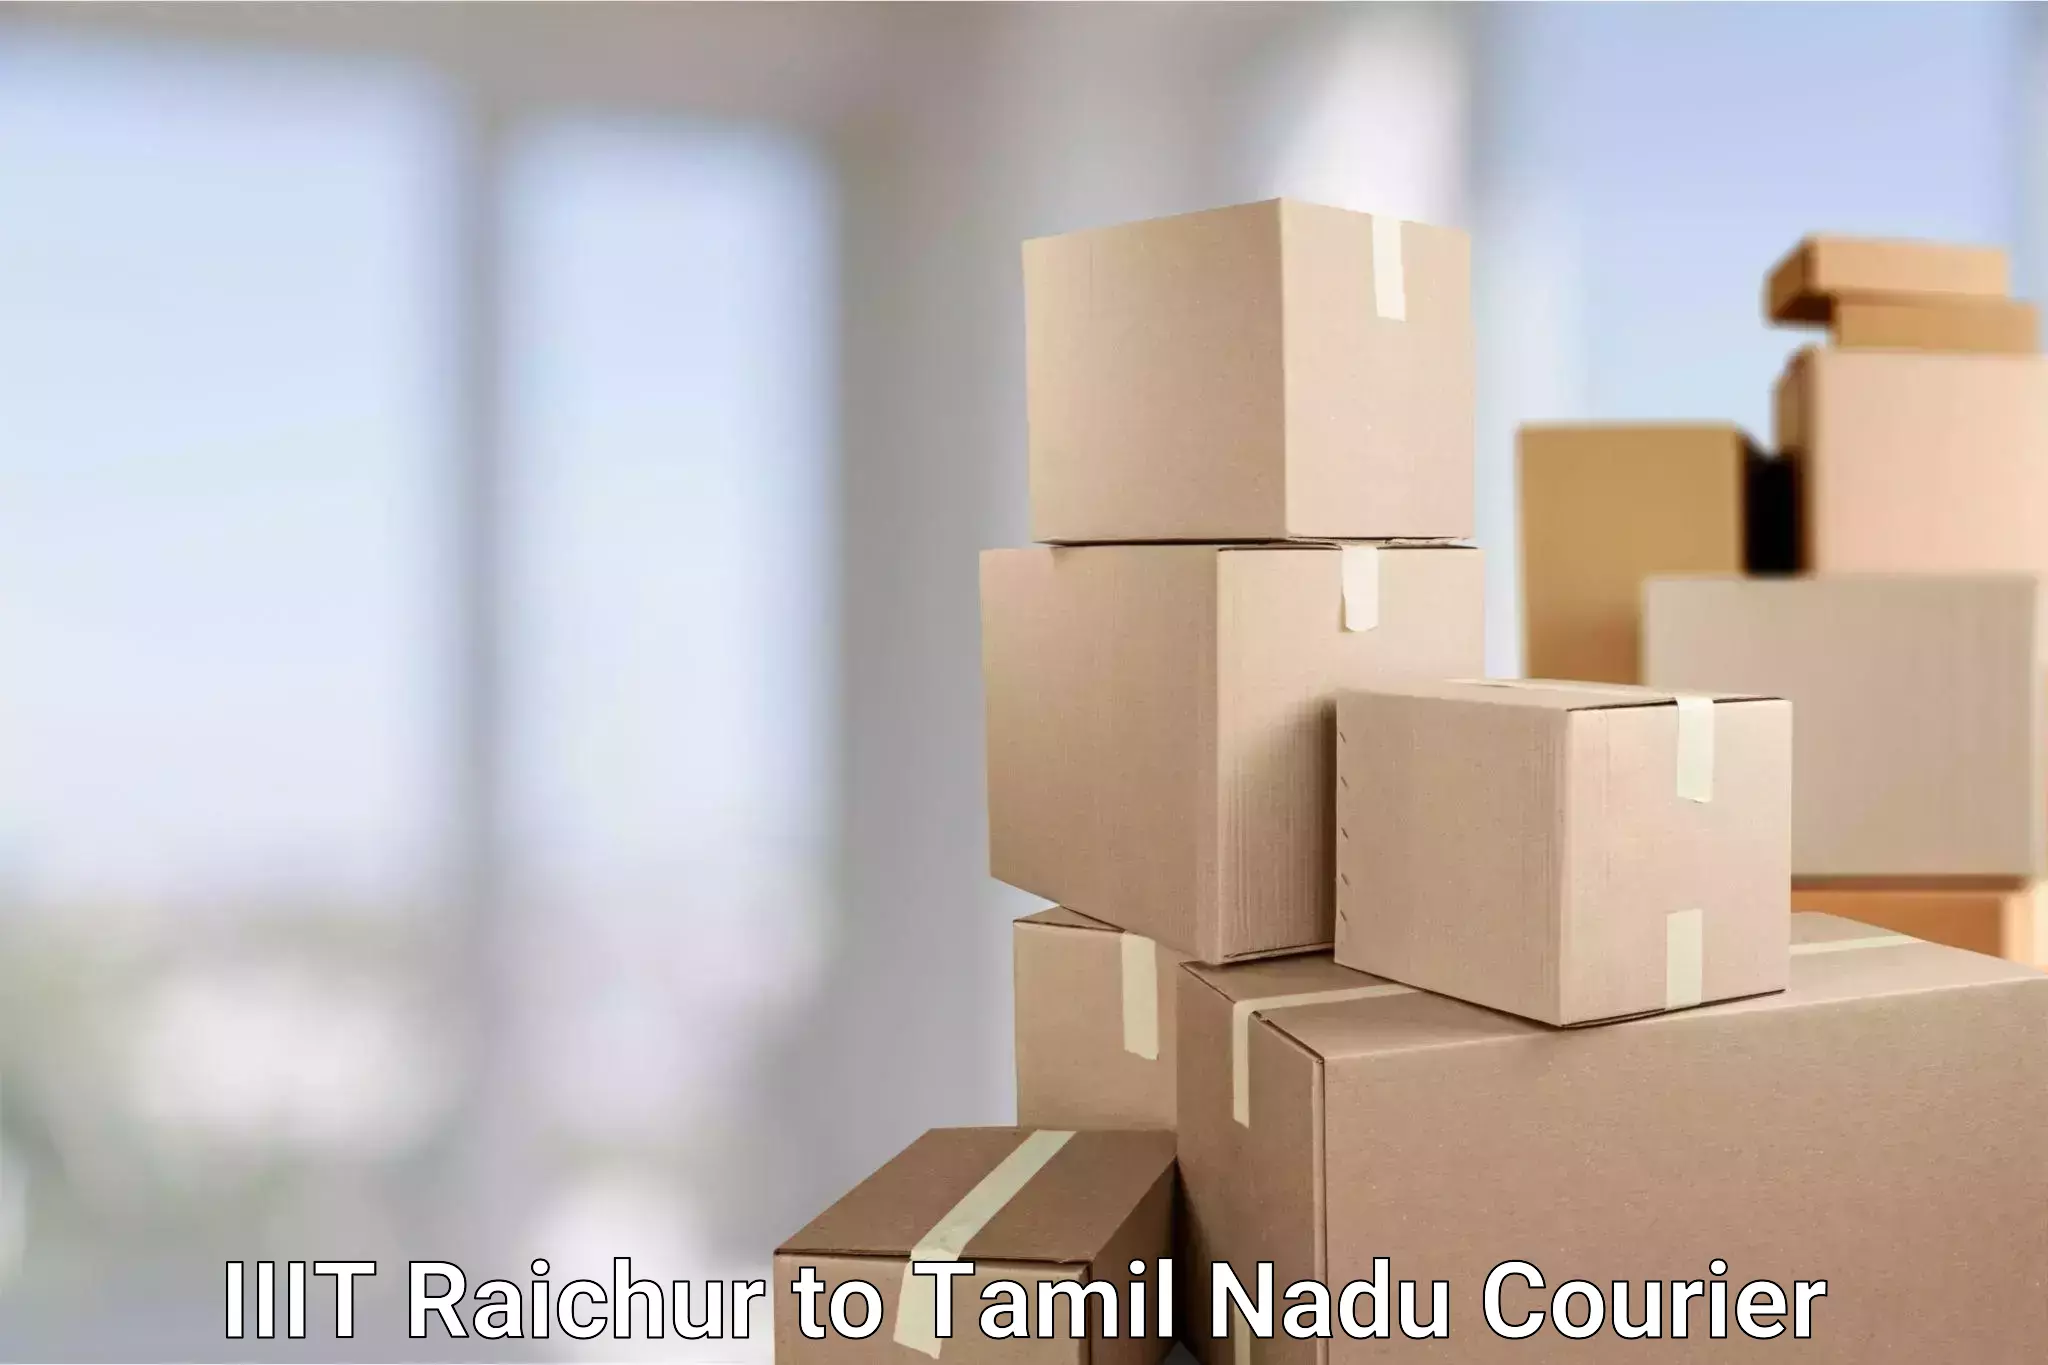 Global courier networks IIIT Raichur to Meenakshi Academy of Higher Education and Research Chennai